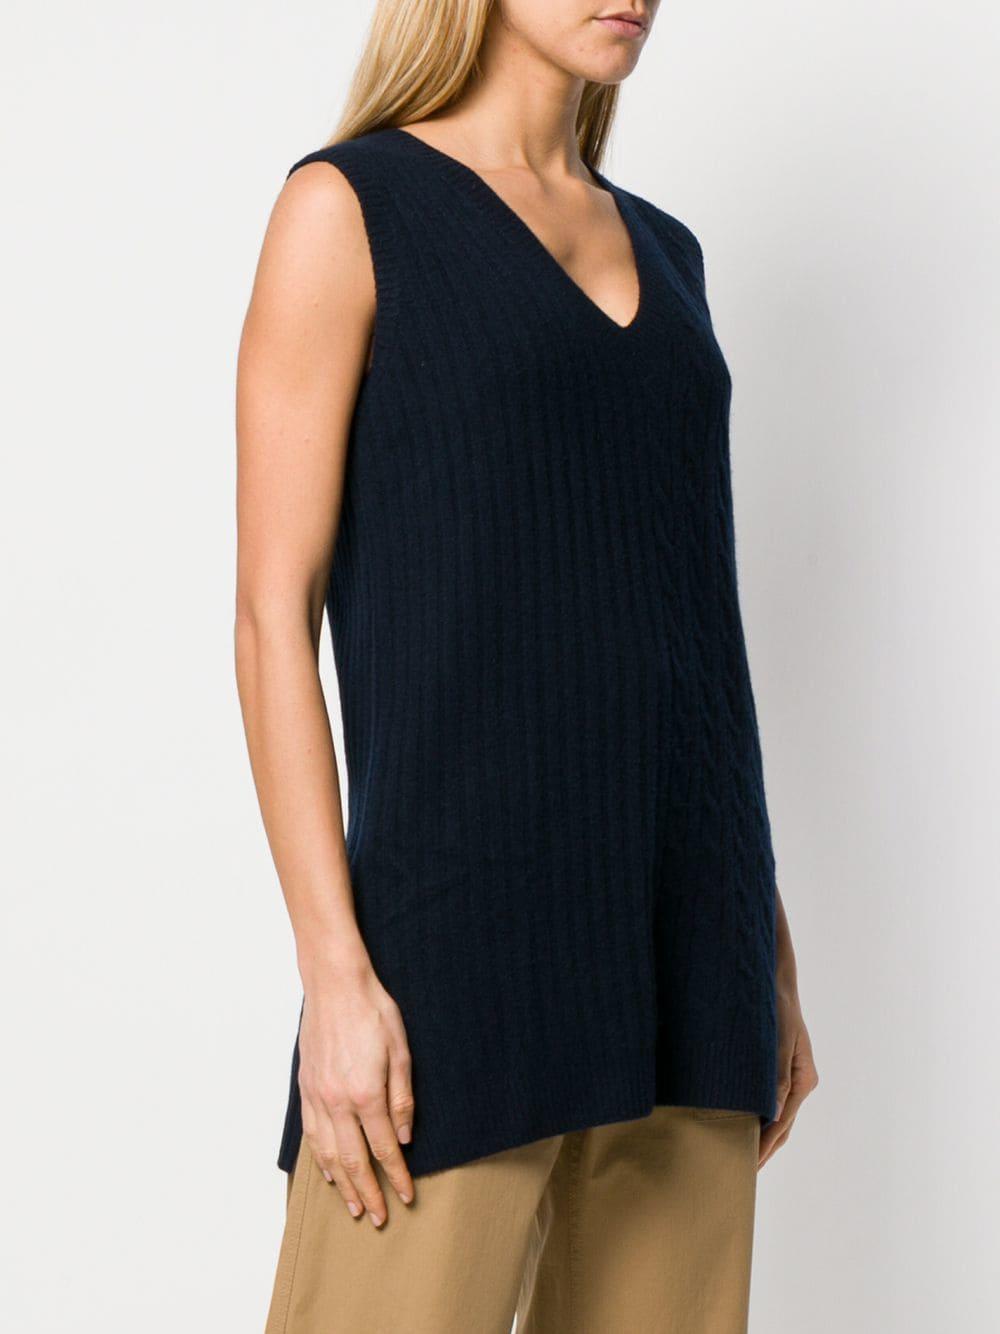 Lyst - Pringle of Scotland Cable Knit Sleeveless Top in Blue